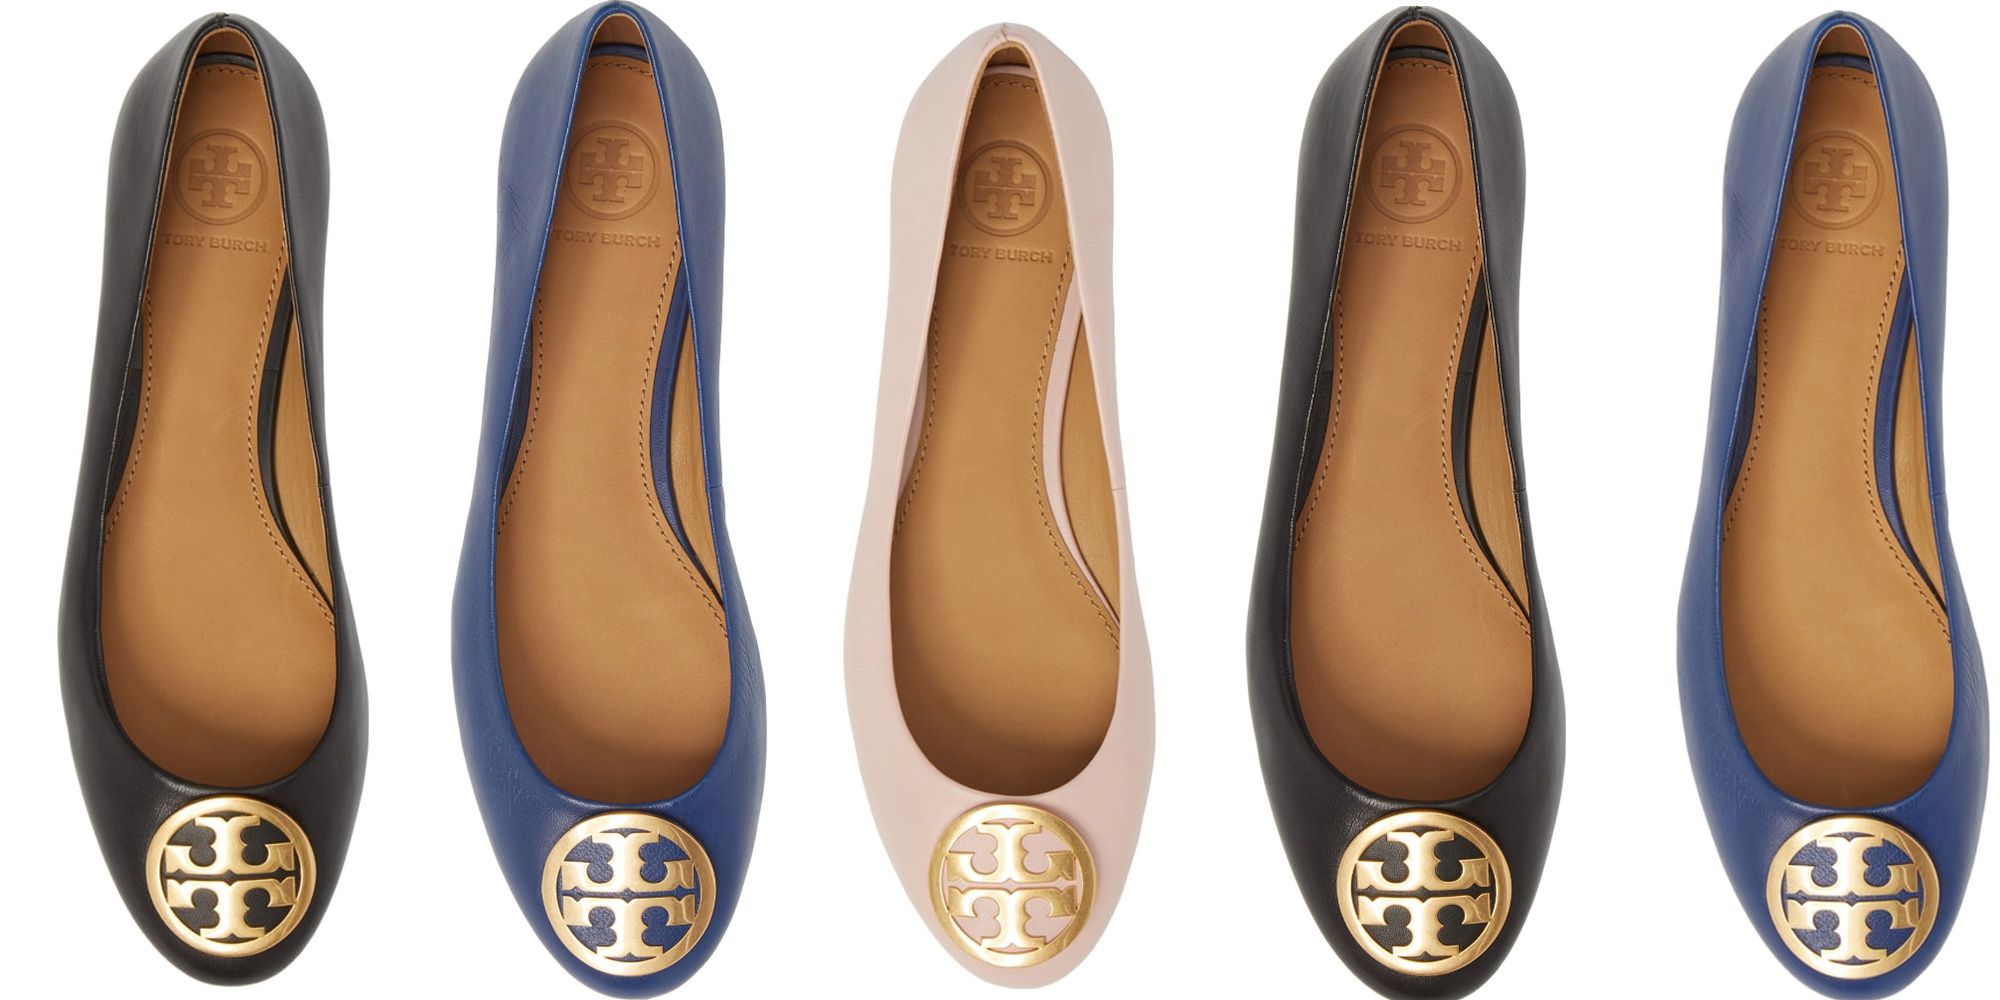 Classic Tory Burch Flats Are $84 Off at 